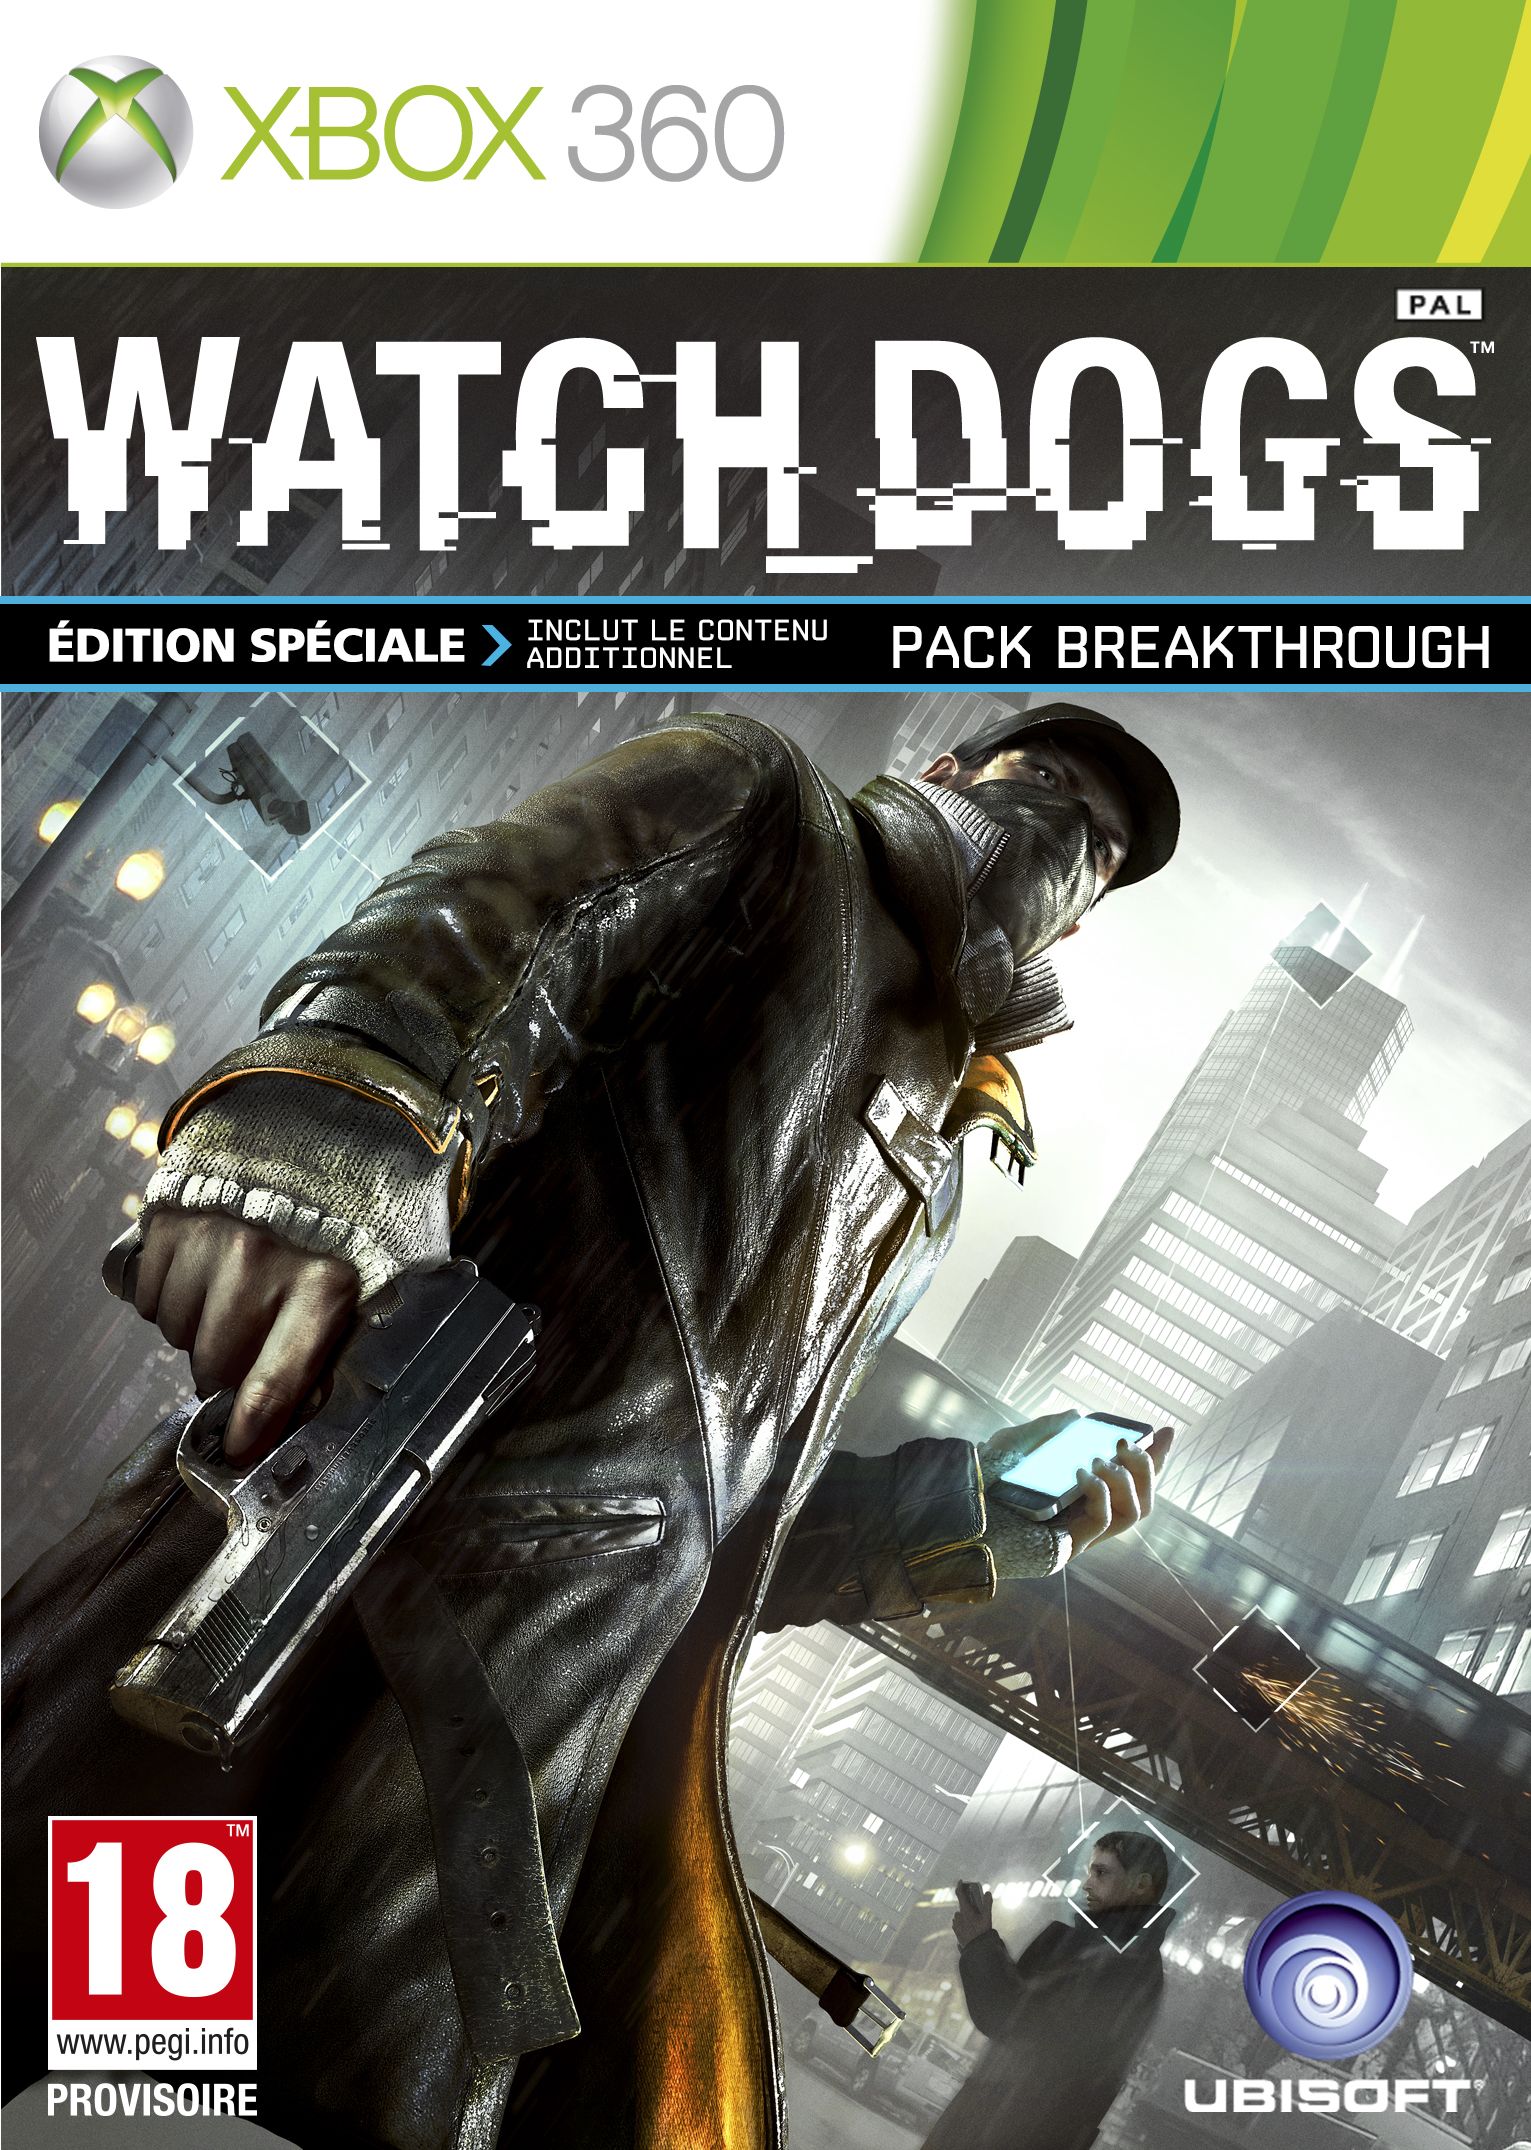 Watch Dogs Special Edition